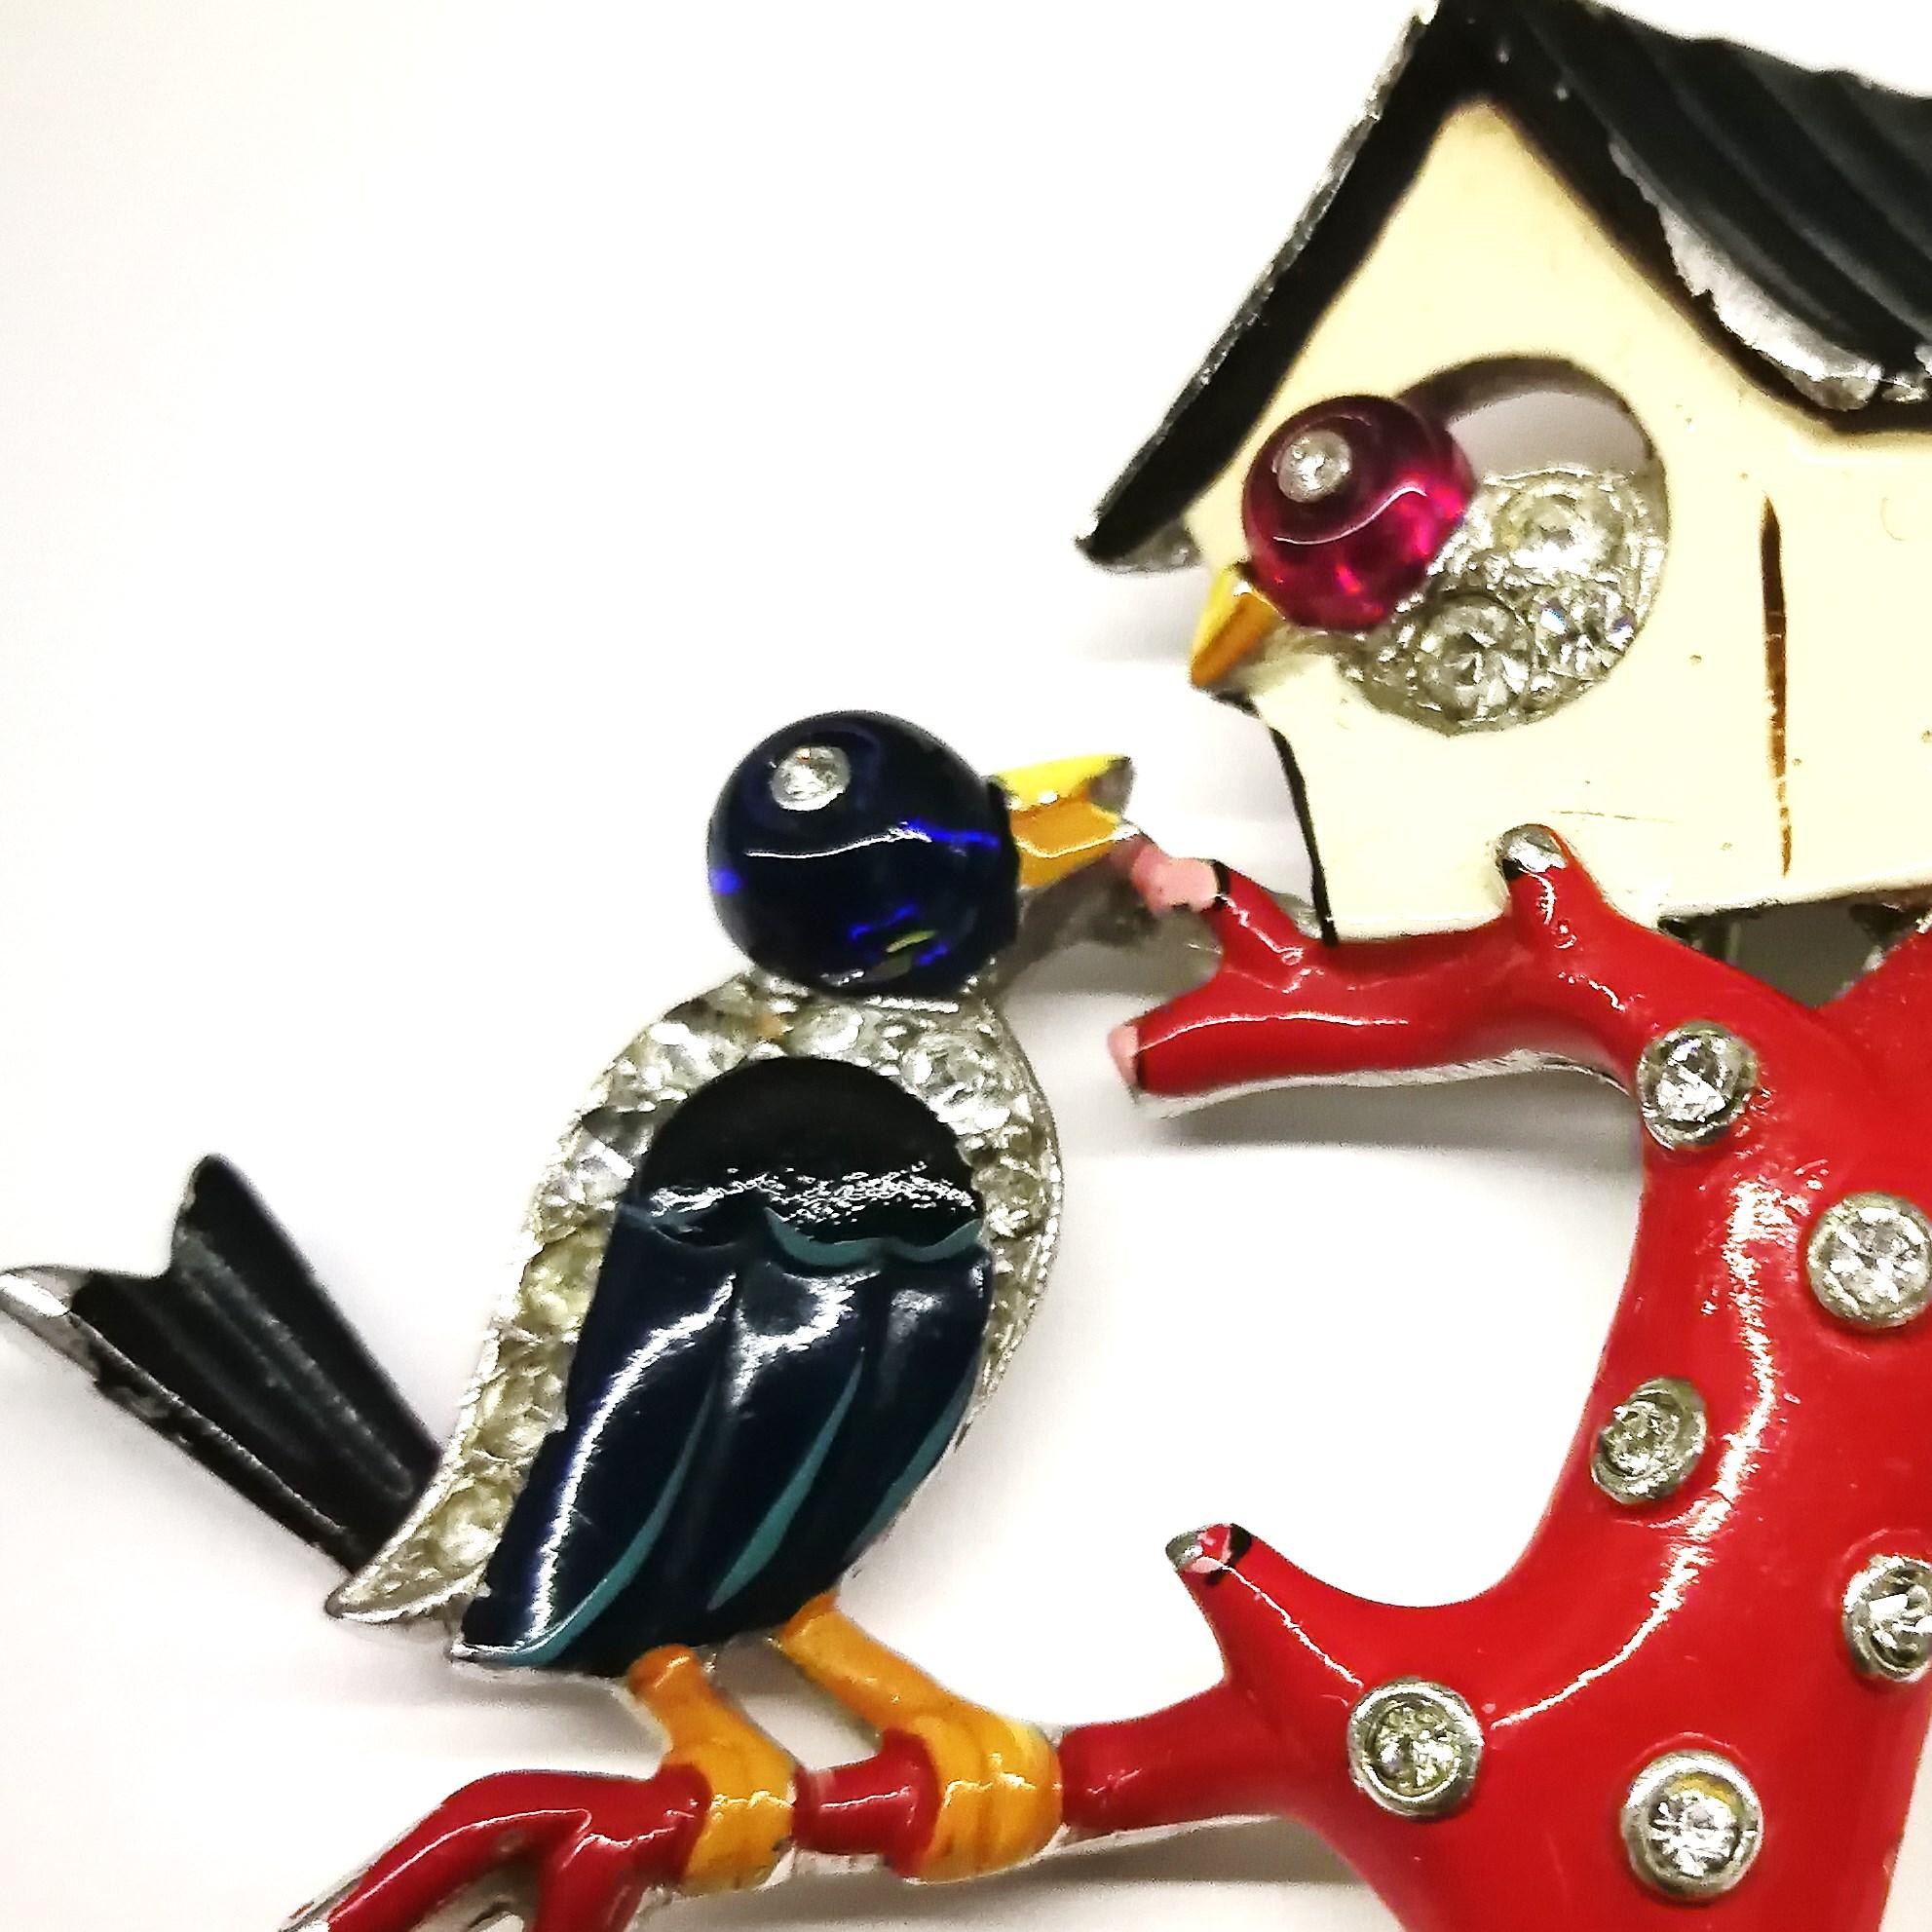 A beautifully crafted and highly sort after/collectable early piece from Trifari, an enchanting 'life in miniature', with two birds on a branch, with bird box. Cold enamelled and highlighted with pastes, it would be a great asset to any collection